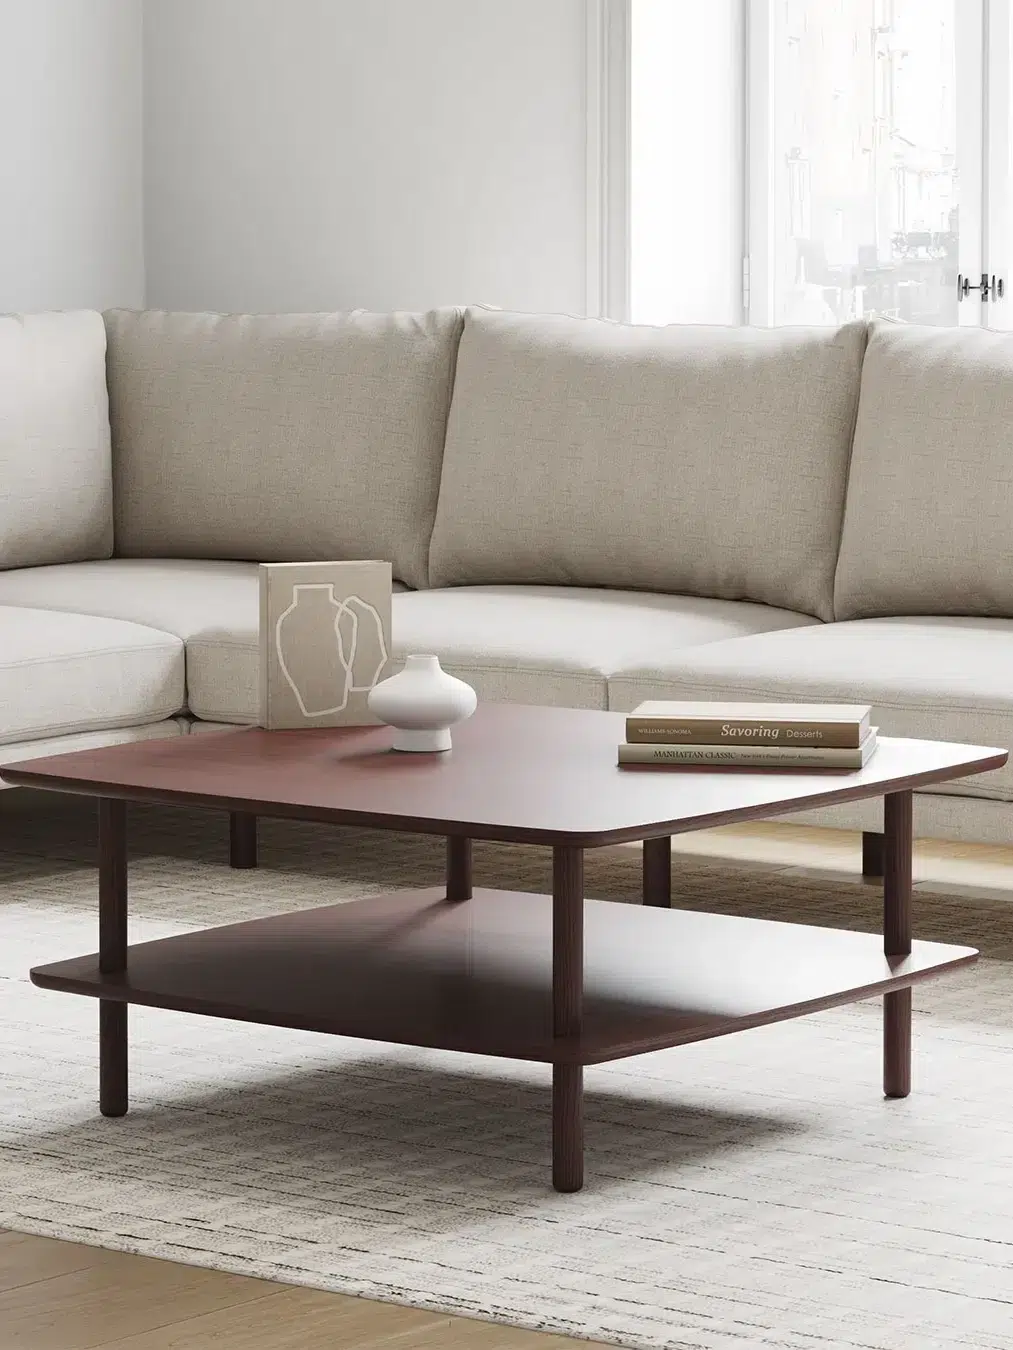 A Burrow coffee table in a styled living room. 